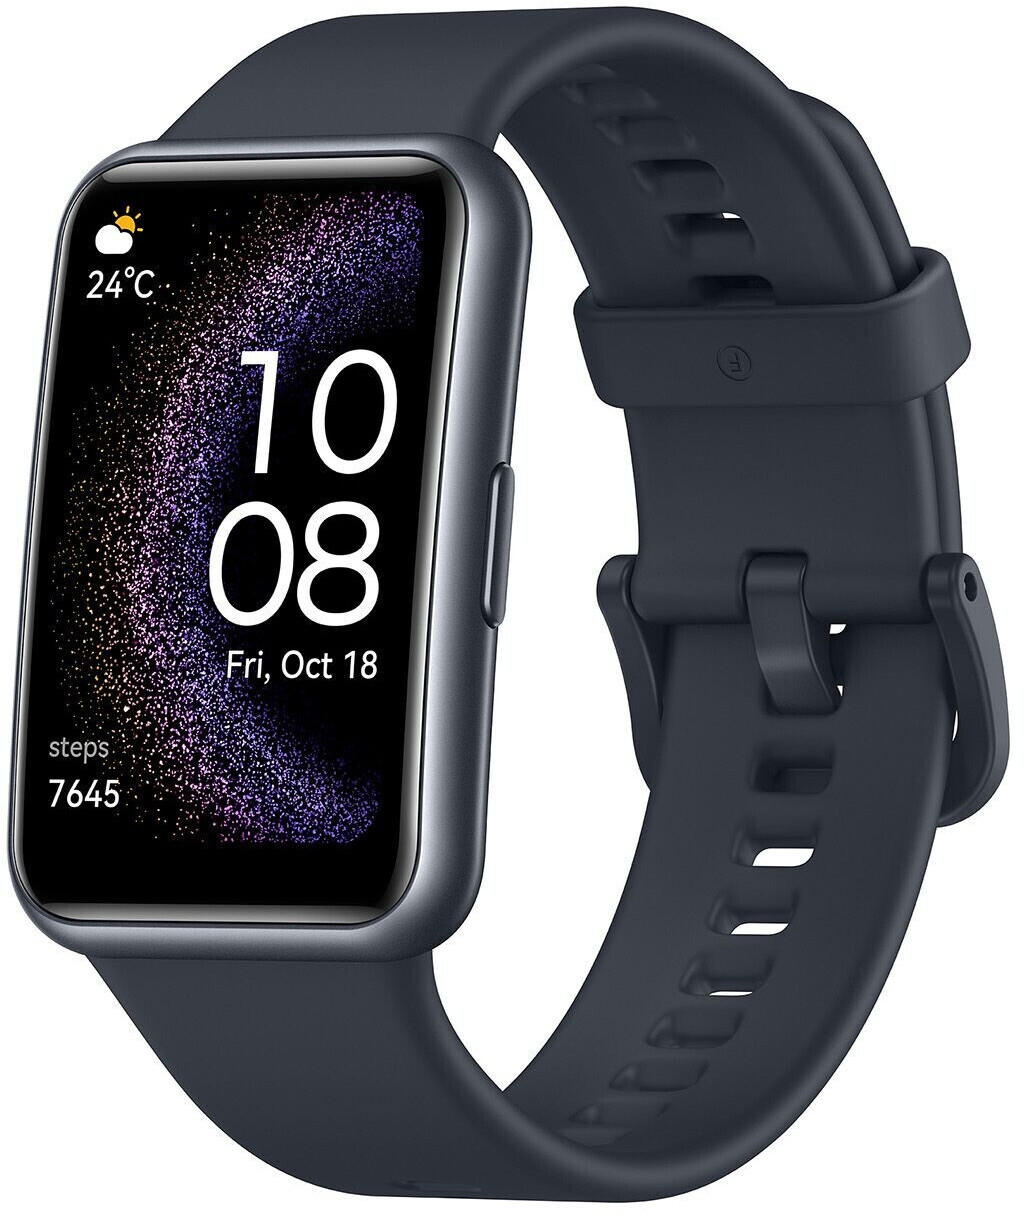 - Test Huawei Fit Note: Edition Black Starry Watch 80/100 Special